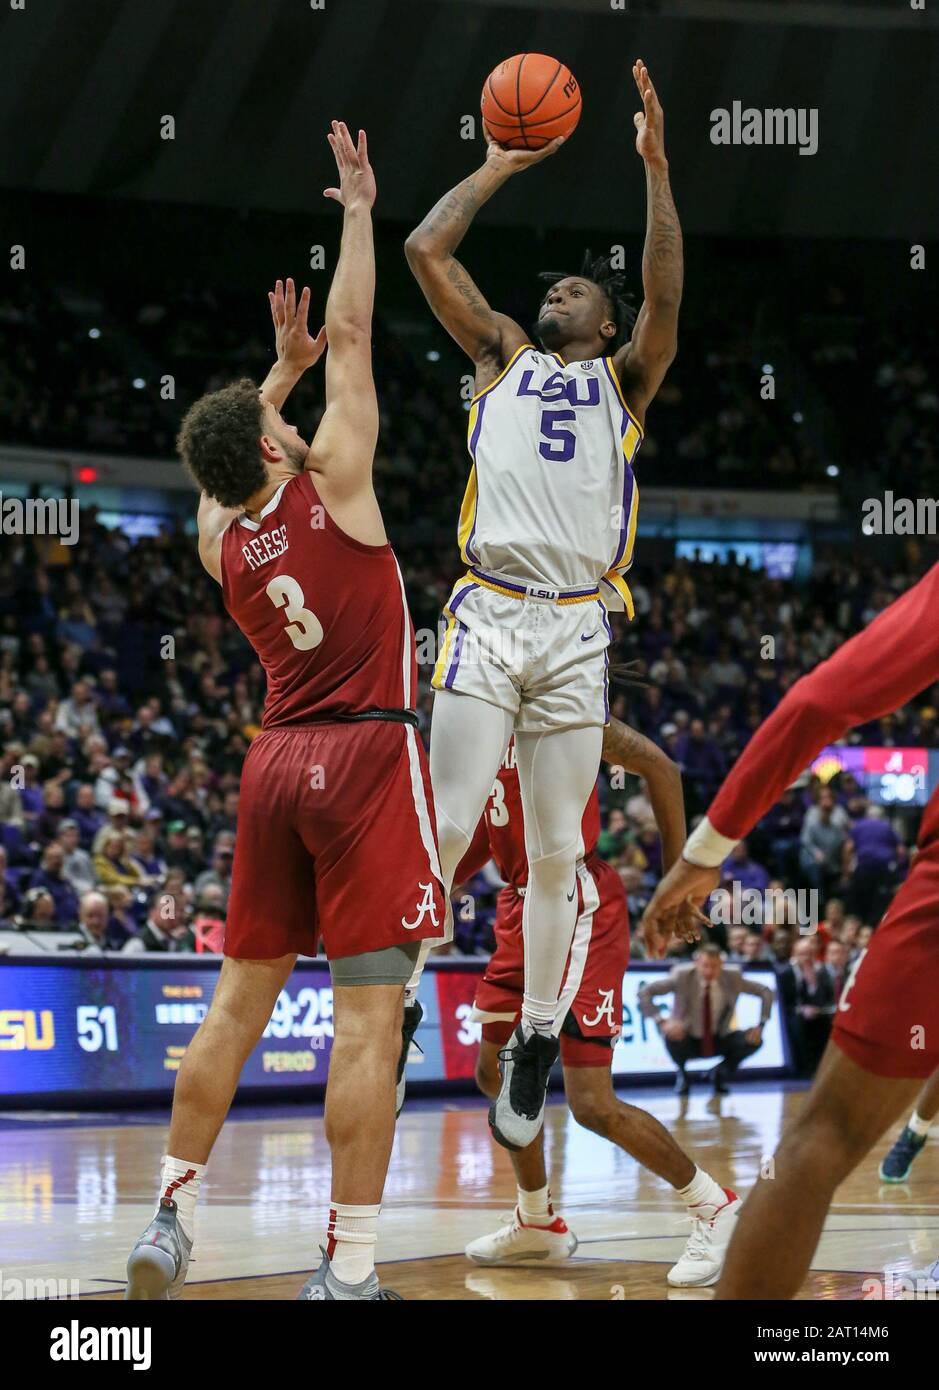 Baton Rouge, LA, USA. 29th Jan, 2020. LSU's Emmitt Williams (5) attempts a short shot over Alabama's Alex Reese (3) during NCAA Basketball action between the Alabama Crimson Tide and the LSU Tigers at the Pete Maravich Assembly Center in Baton Rouge, LA. Jonathan Mailhes/CSM/Alamy Live News Stock Photo